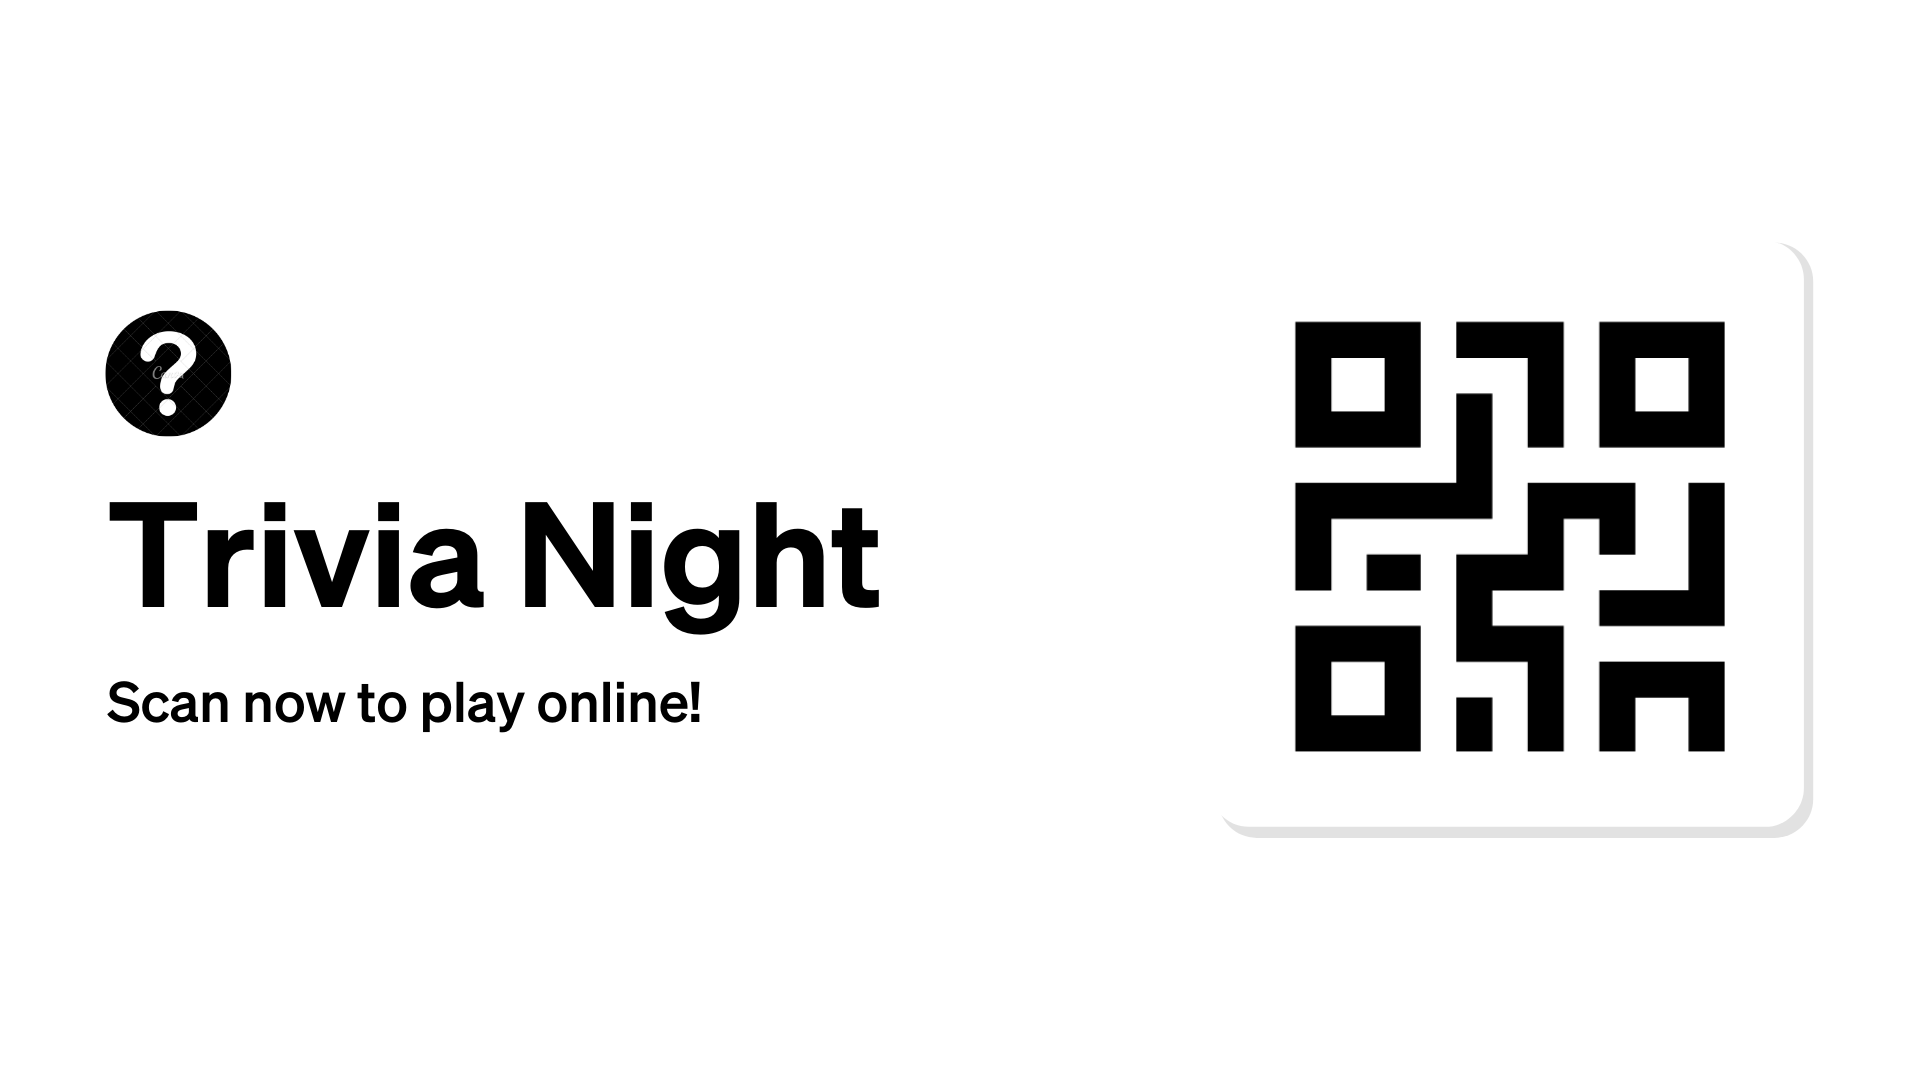 Trivia night with scannable QR code